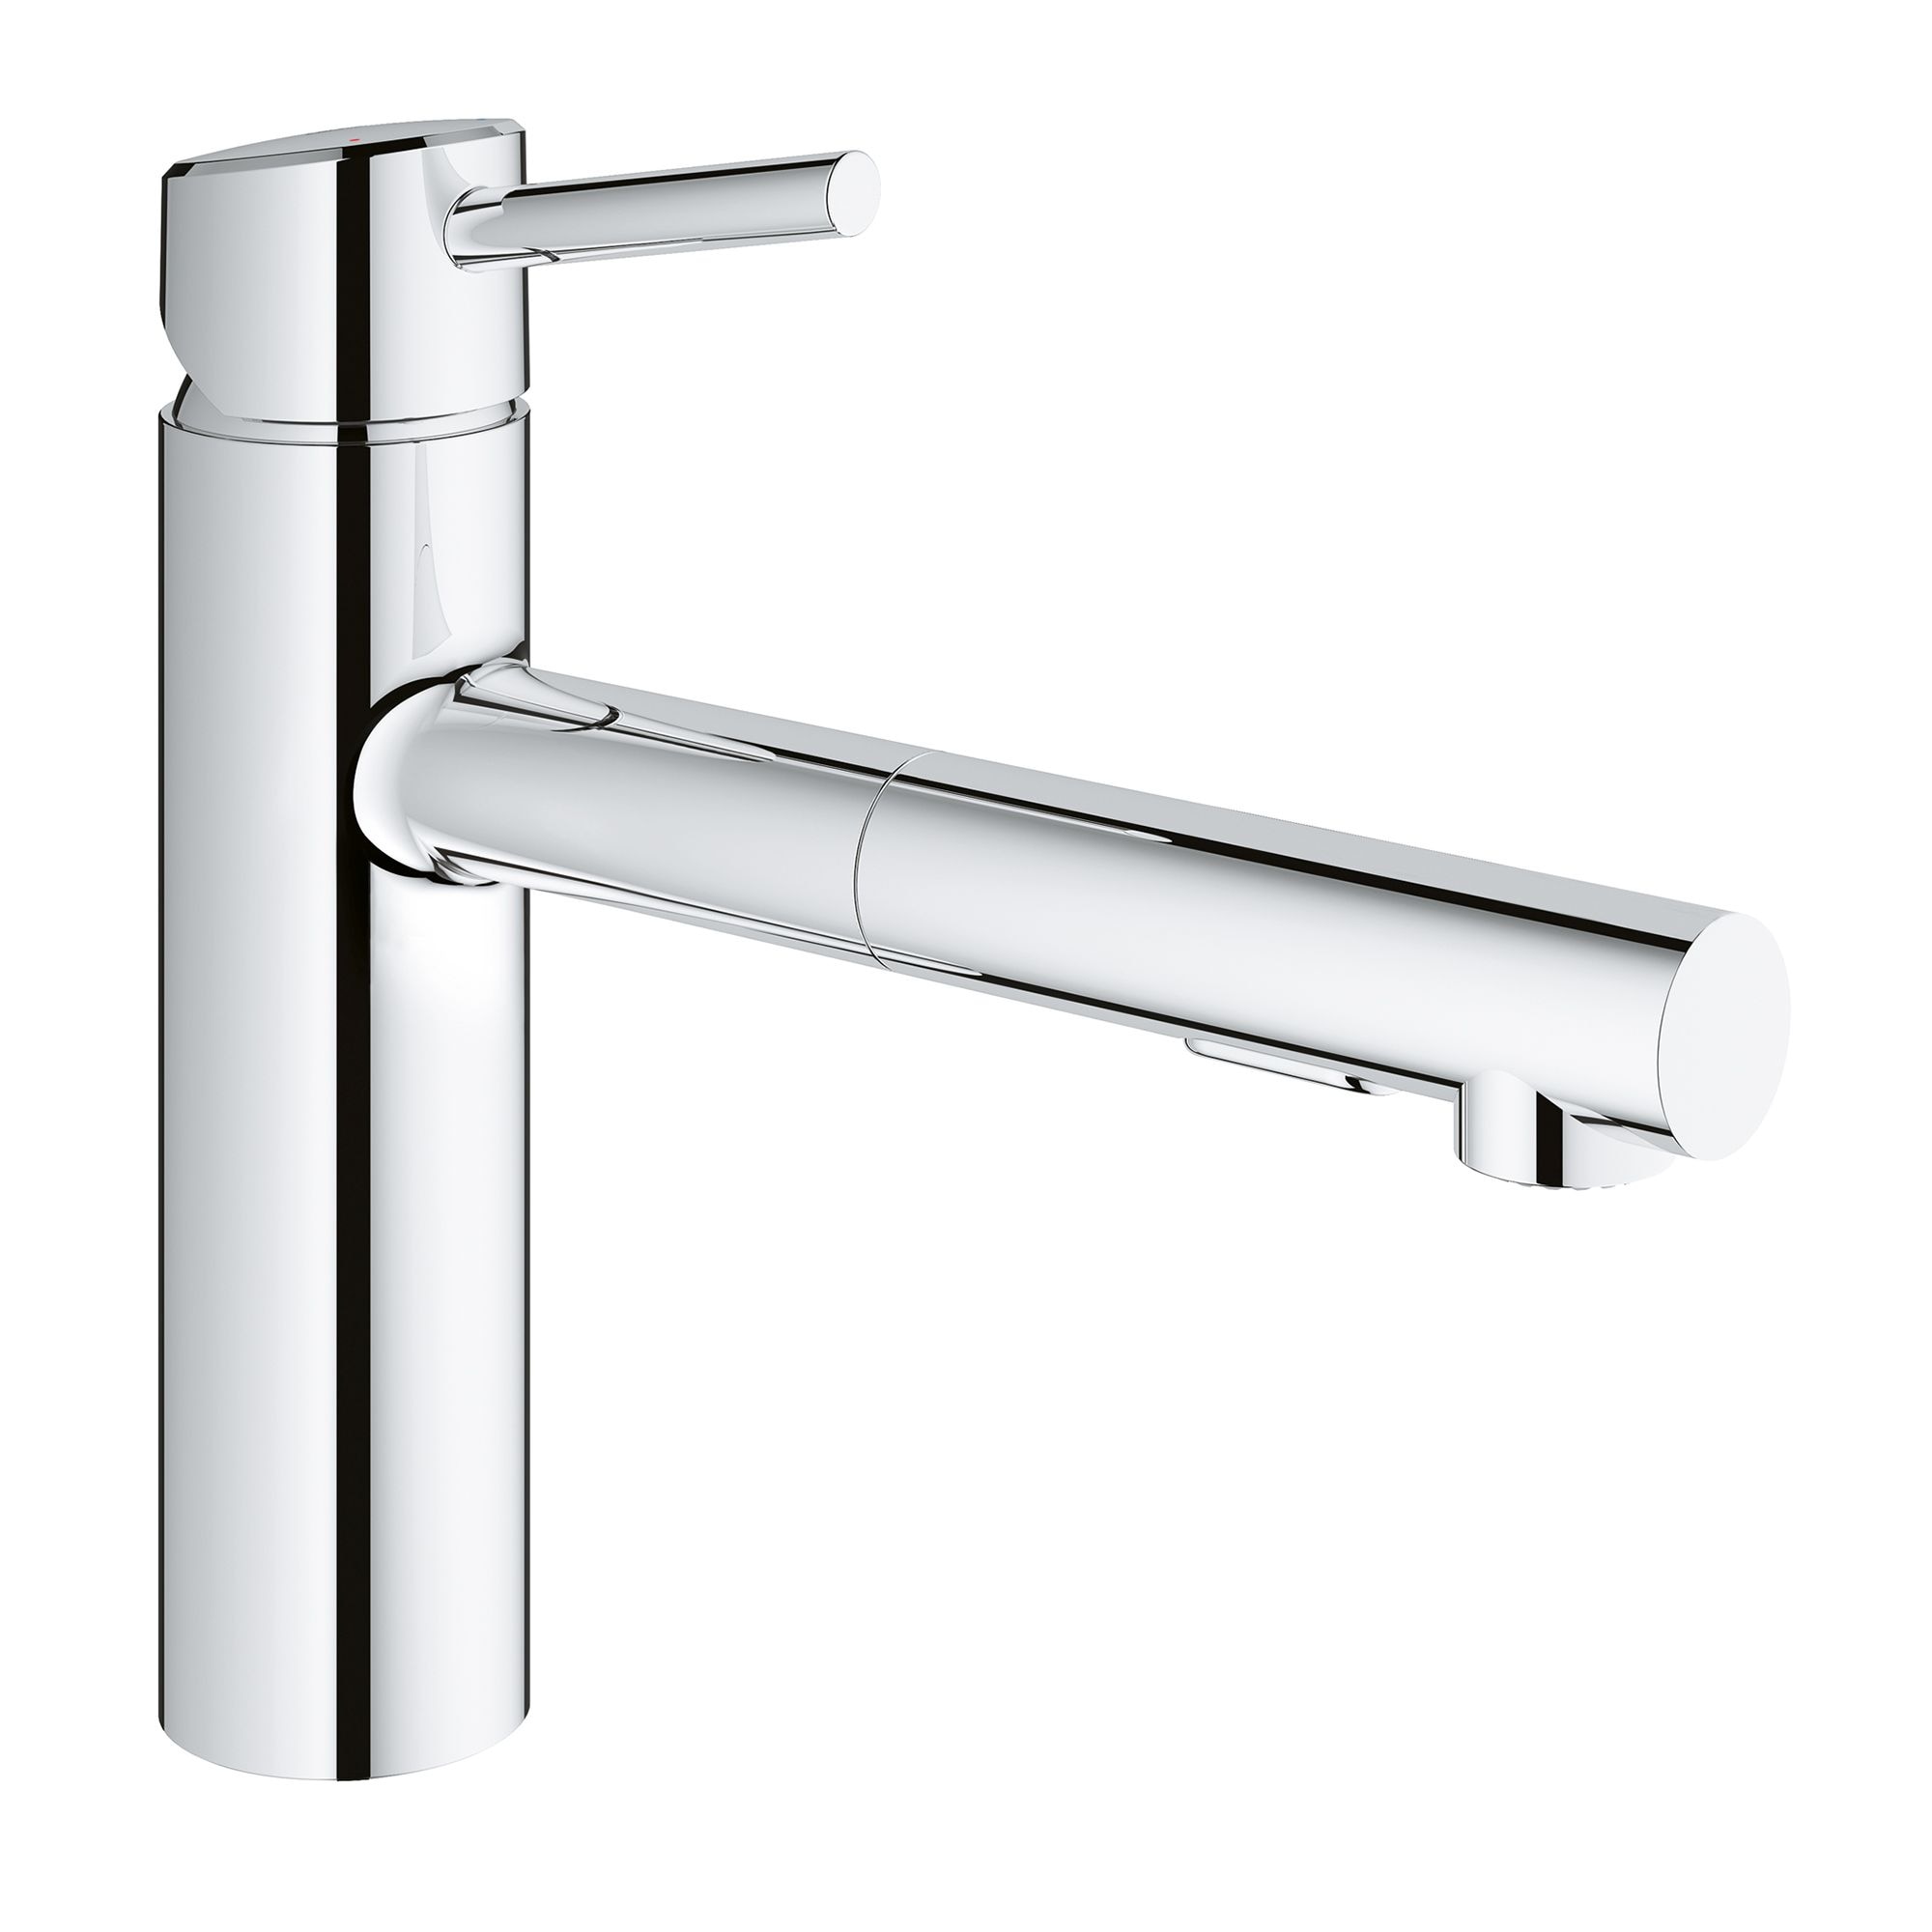 GROHE Concetto Chrome Single Pull-out Kitchen in the Kitchen Faucets department at Lowes.com